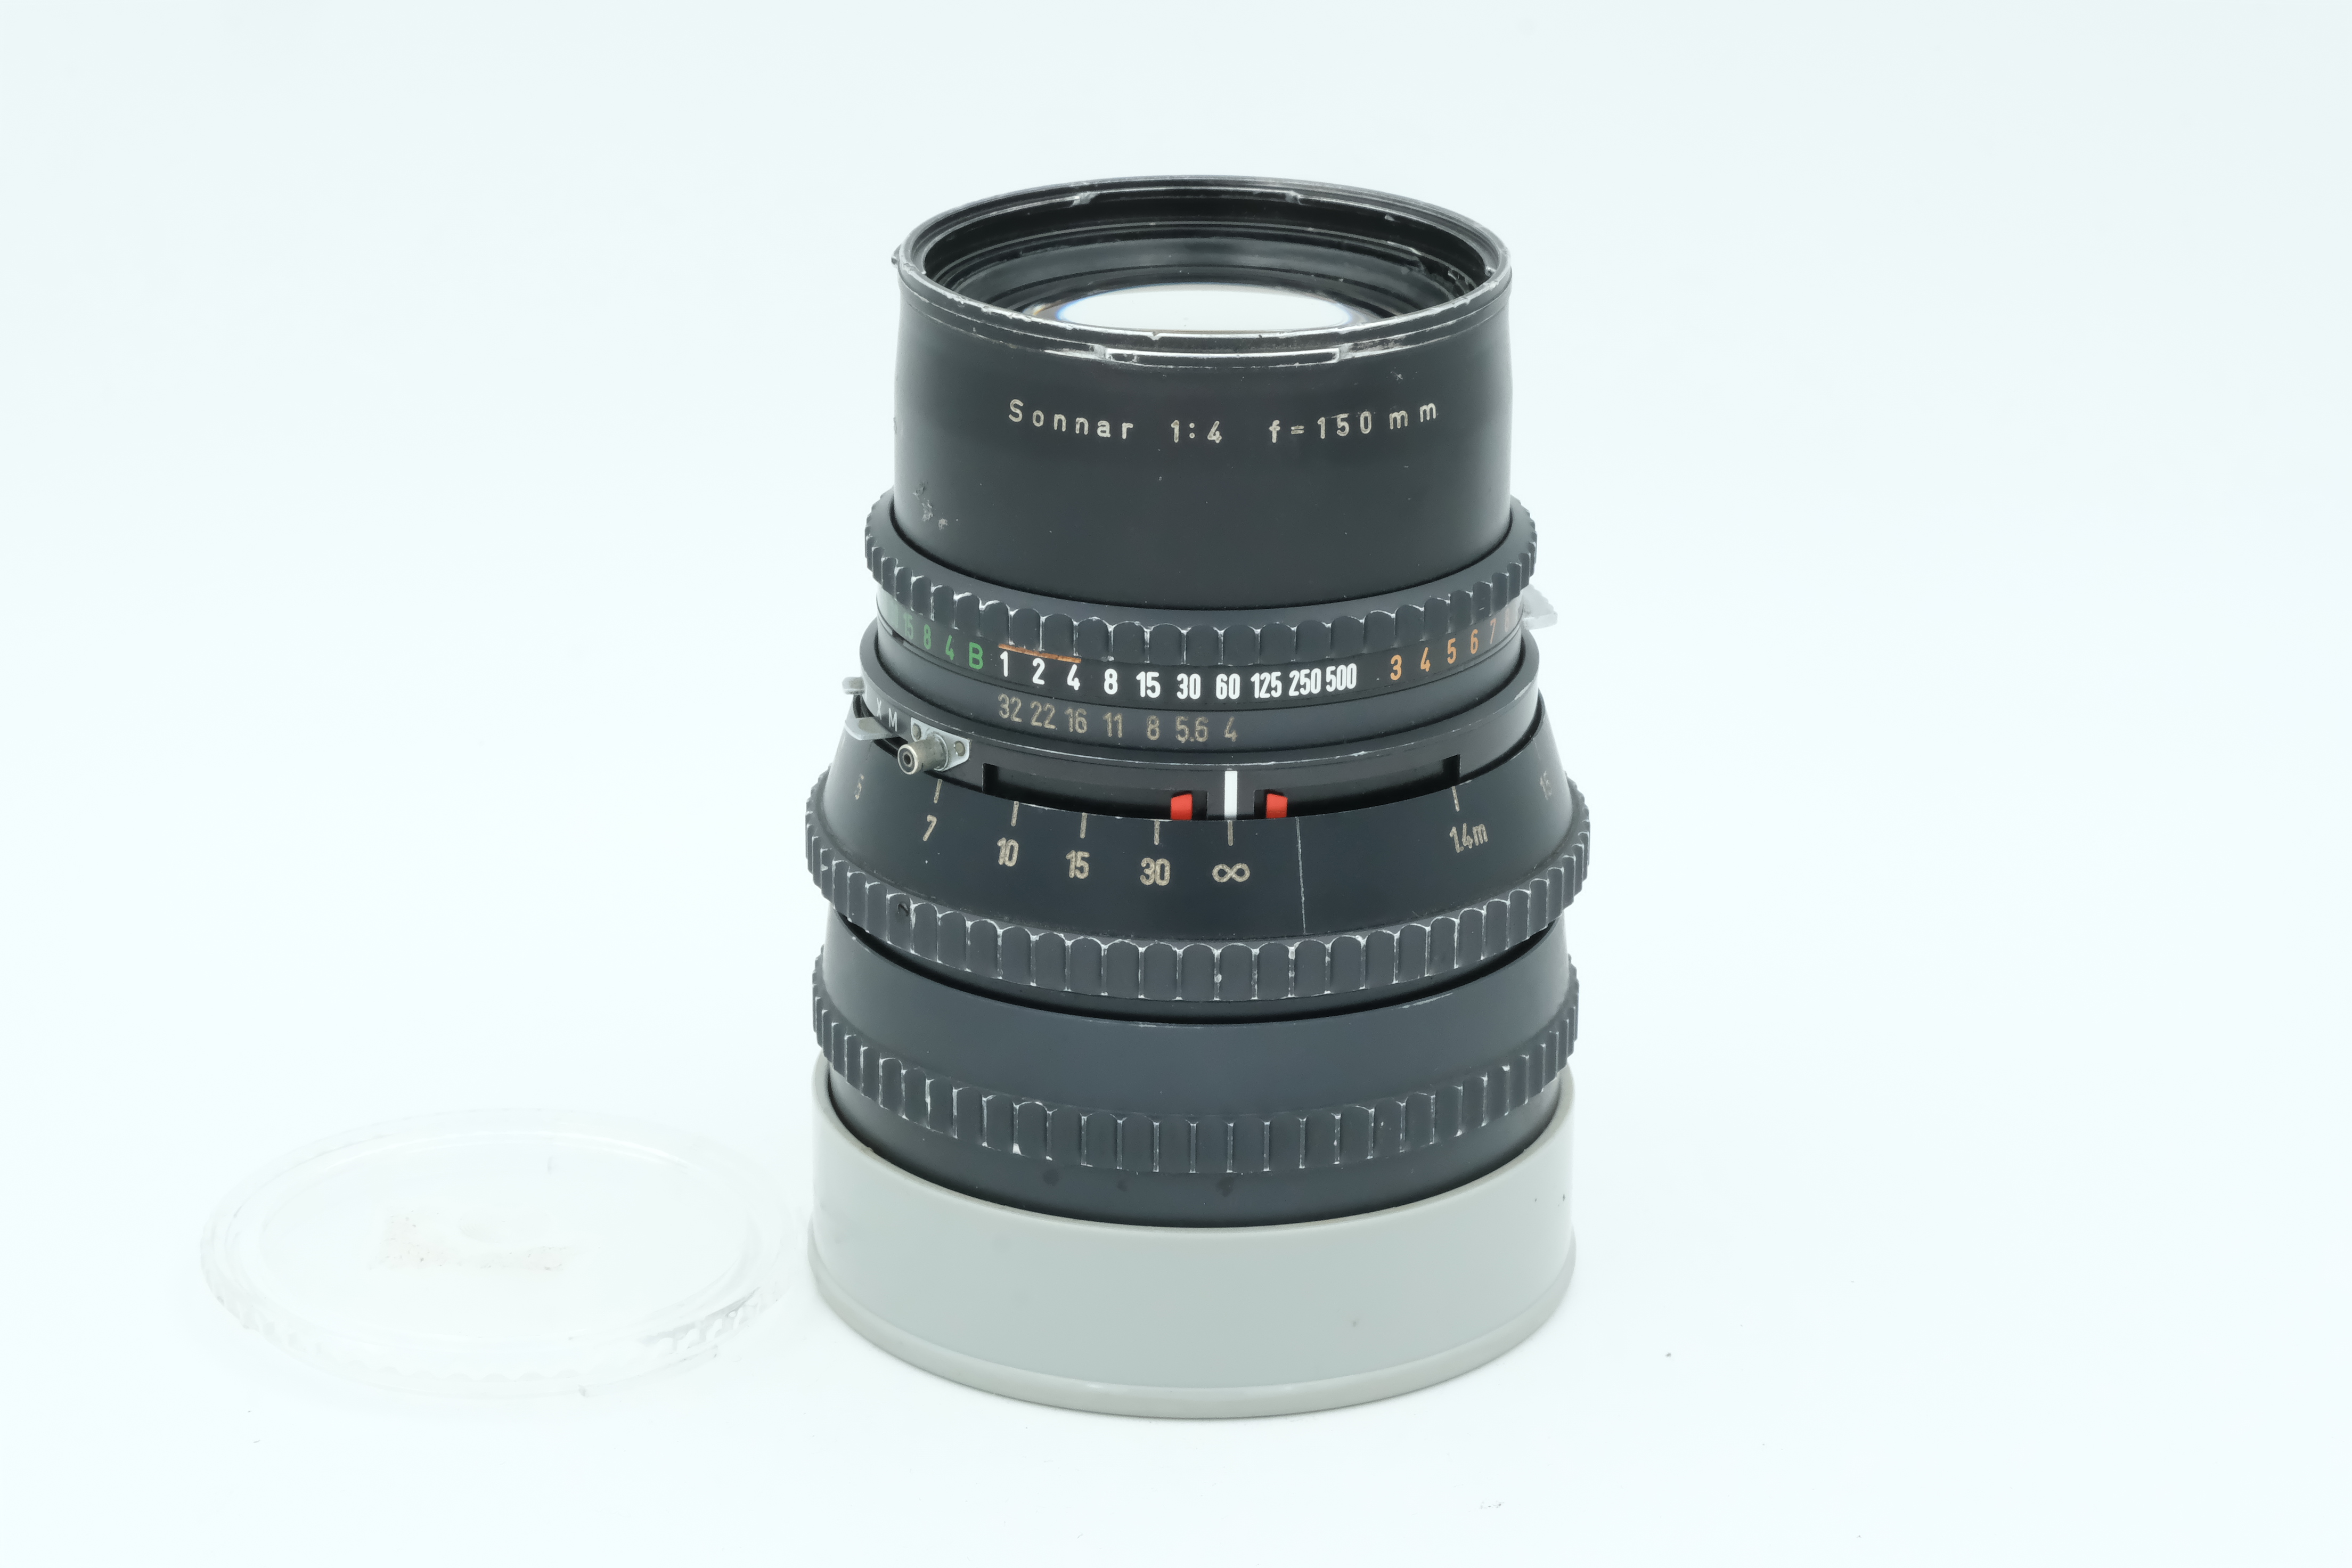 Hasselblad Sonnar 150mm 4,0 T* Carl Zeiss